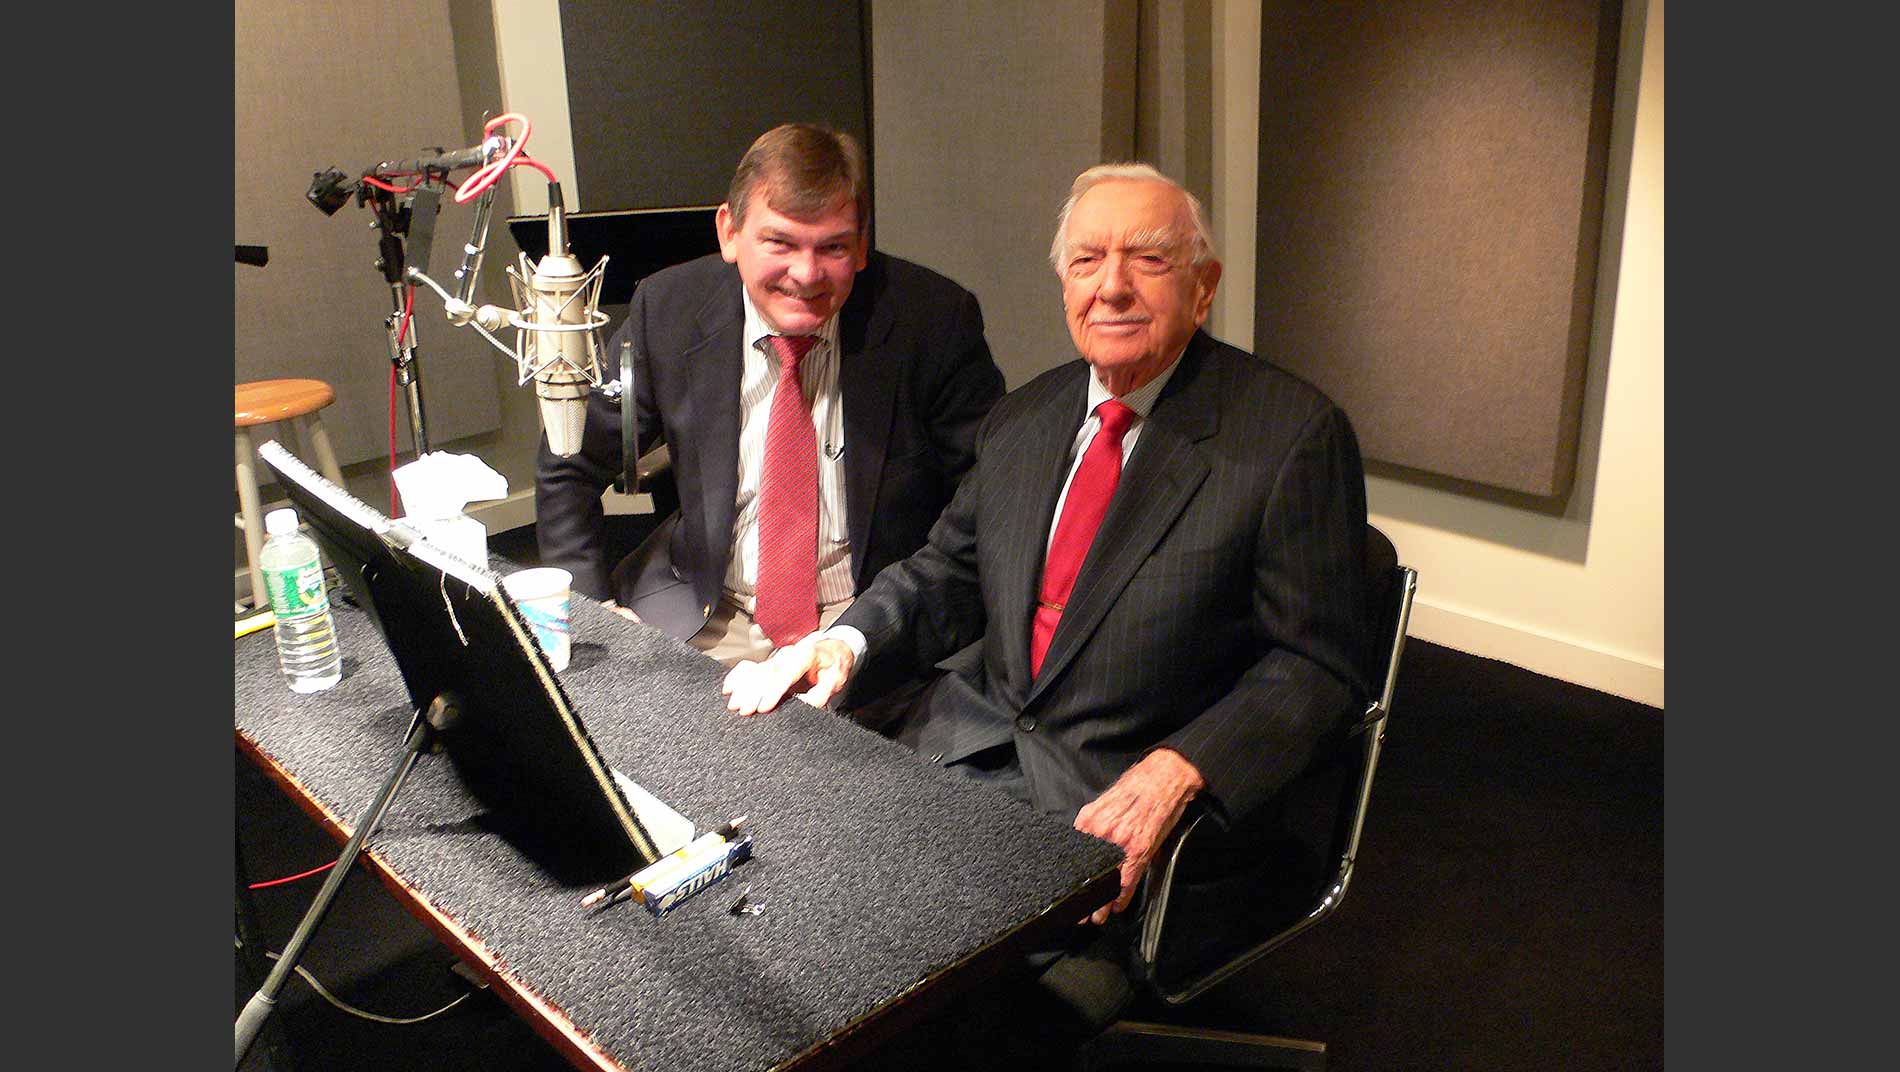 Lee Smith with Walter Cronkite who was the voice of several documentaries on water issues.